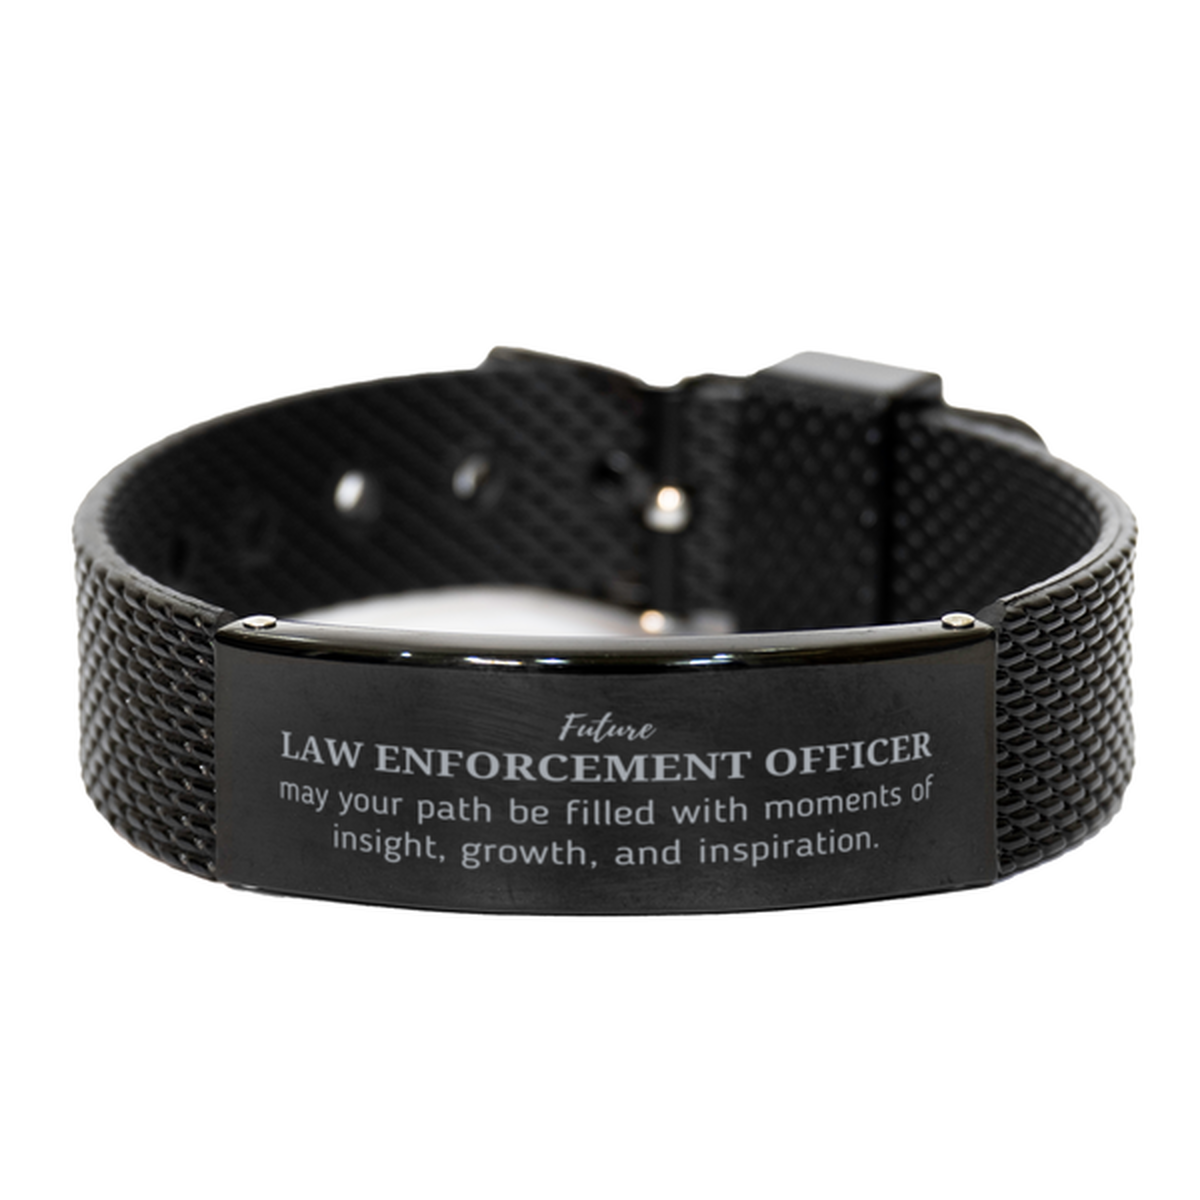 Future Law Enforcement Officer Gifts, May your path be filled with moments of insight, Graduation Gifts for New Law Enforcement Officer, Christmas Unique Black Shark Mesh Bracelet For Men, Women, Friends